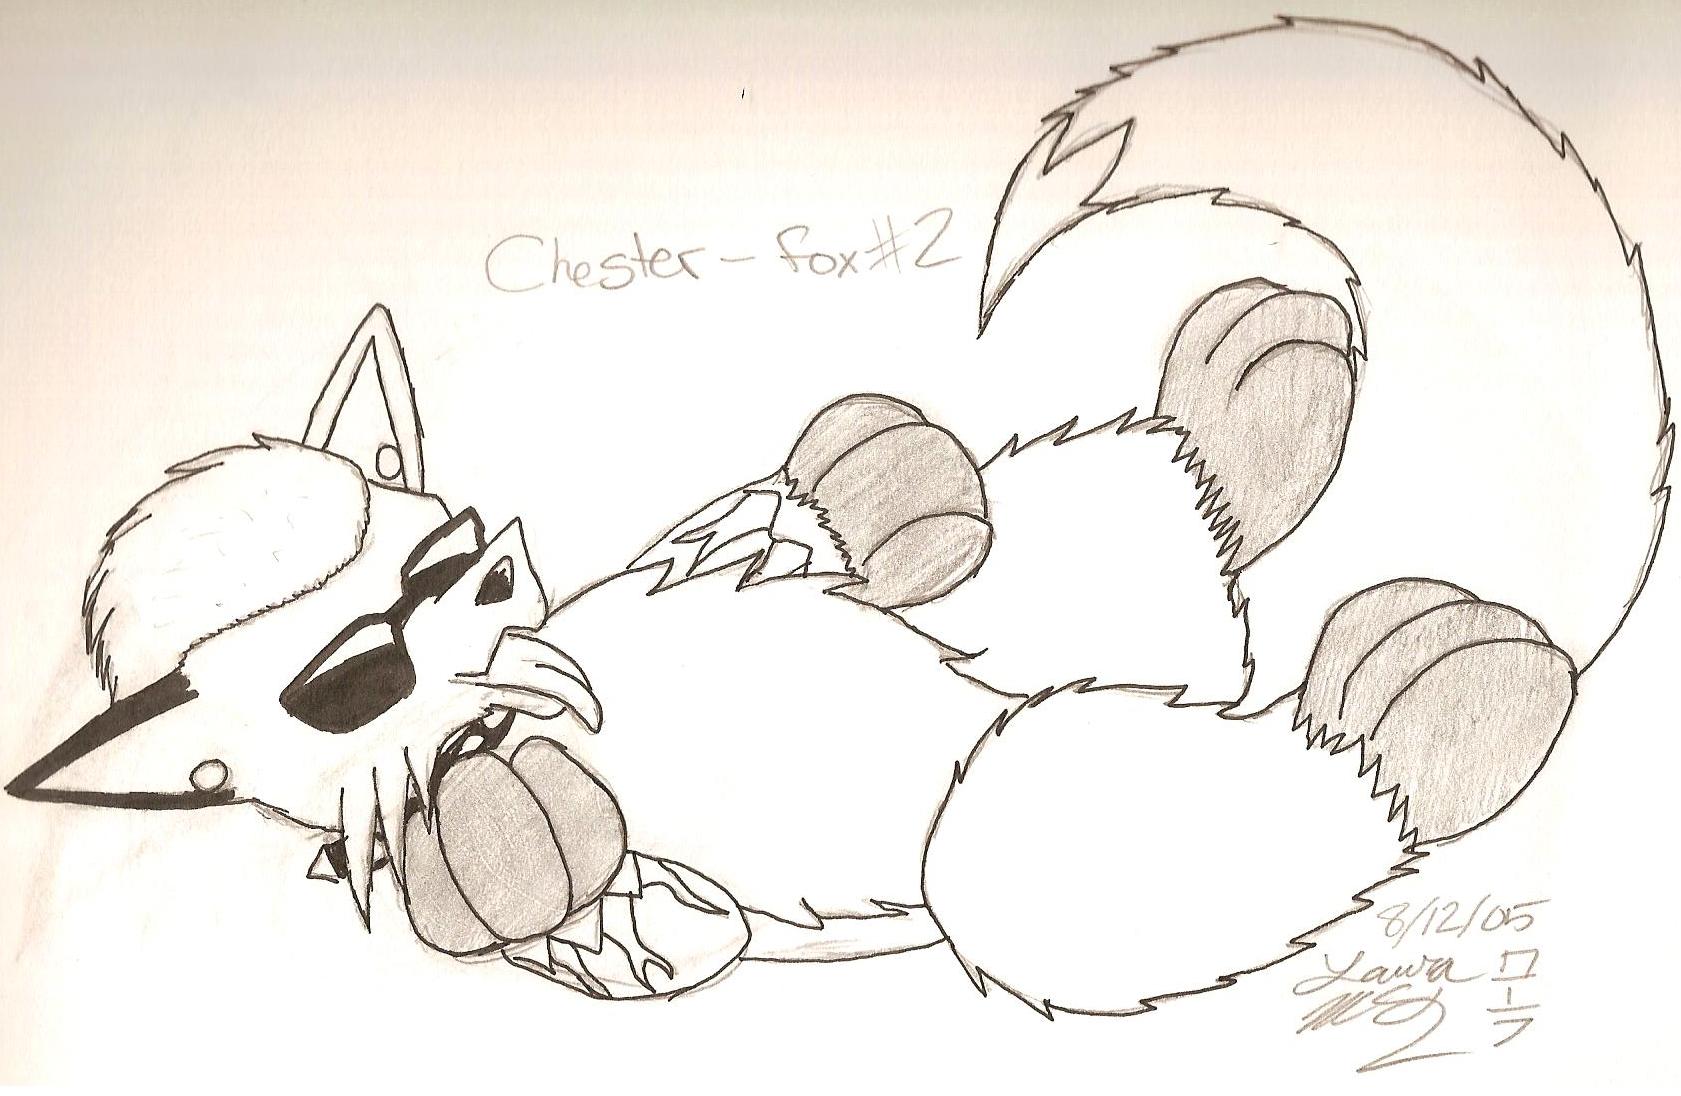 Chester fox number 2 (large dedication) by Derufin